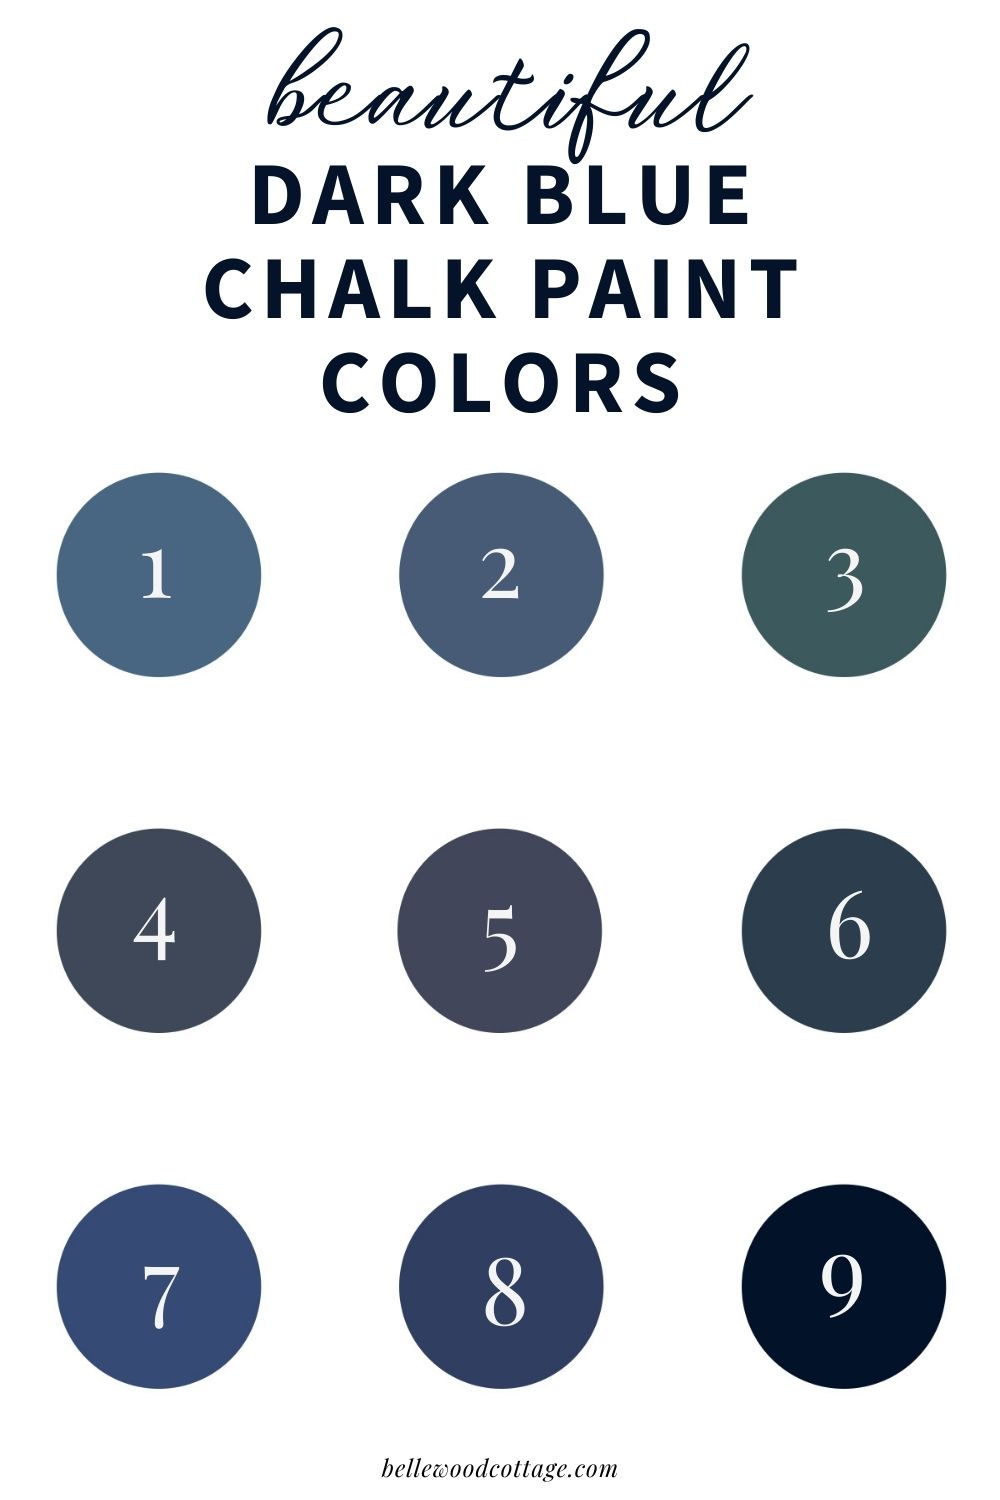 A collage of numbered dark blue and navy paint swatches with the words, "Beautiful Dark Blue Chalk Paint Colors".